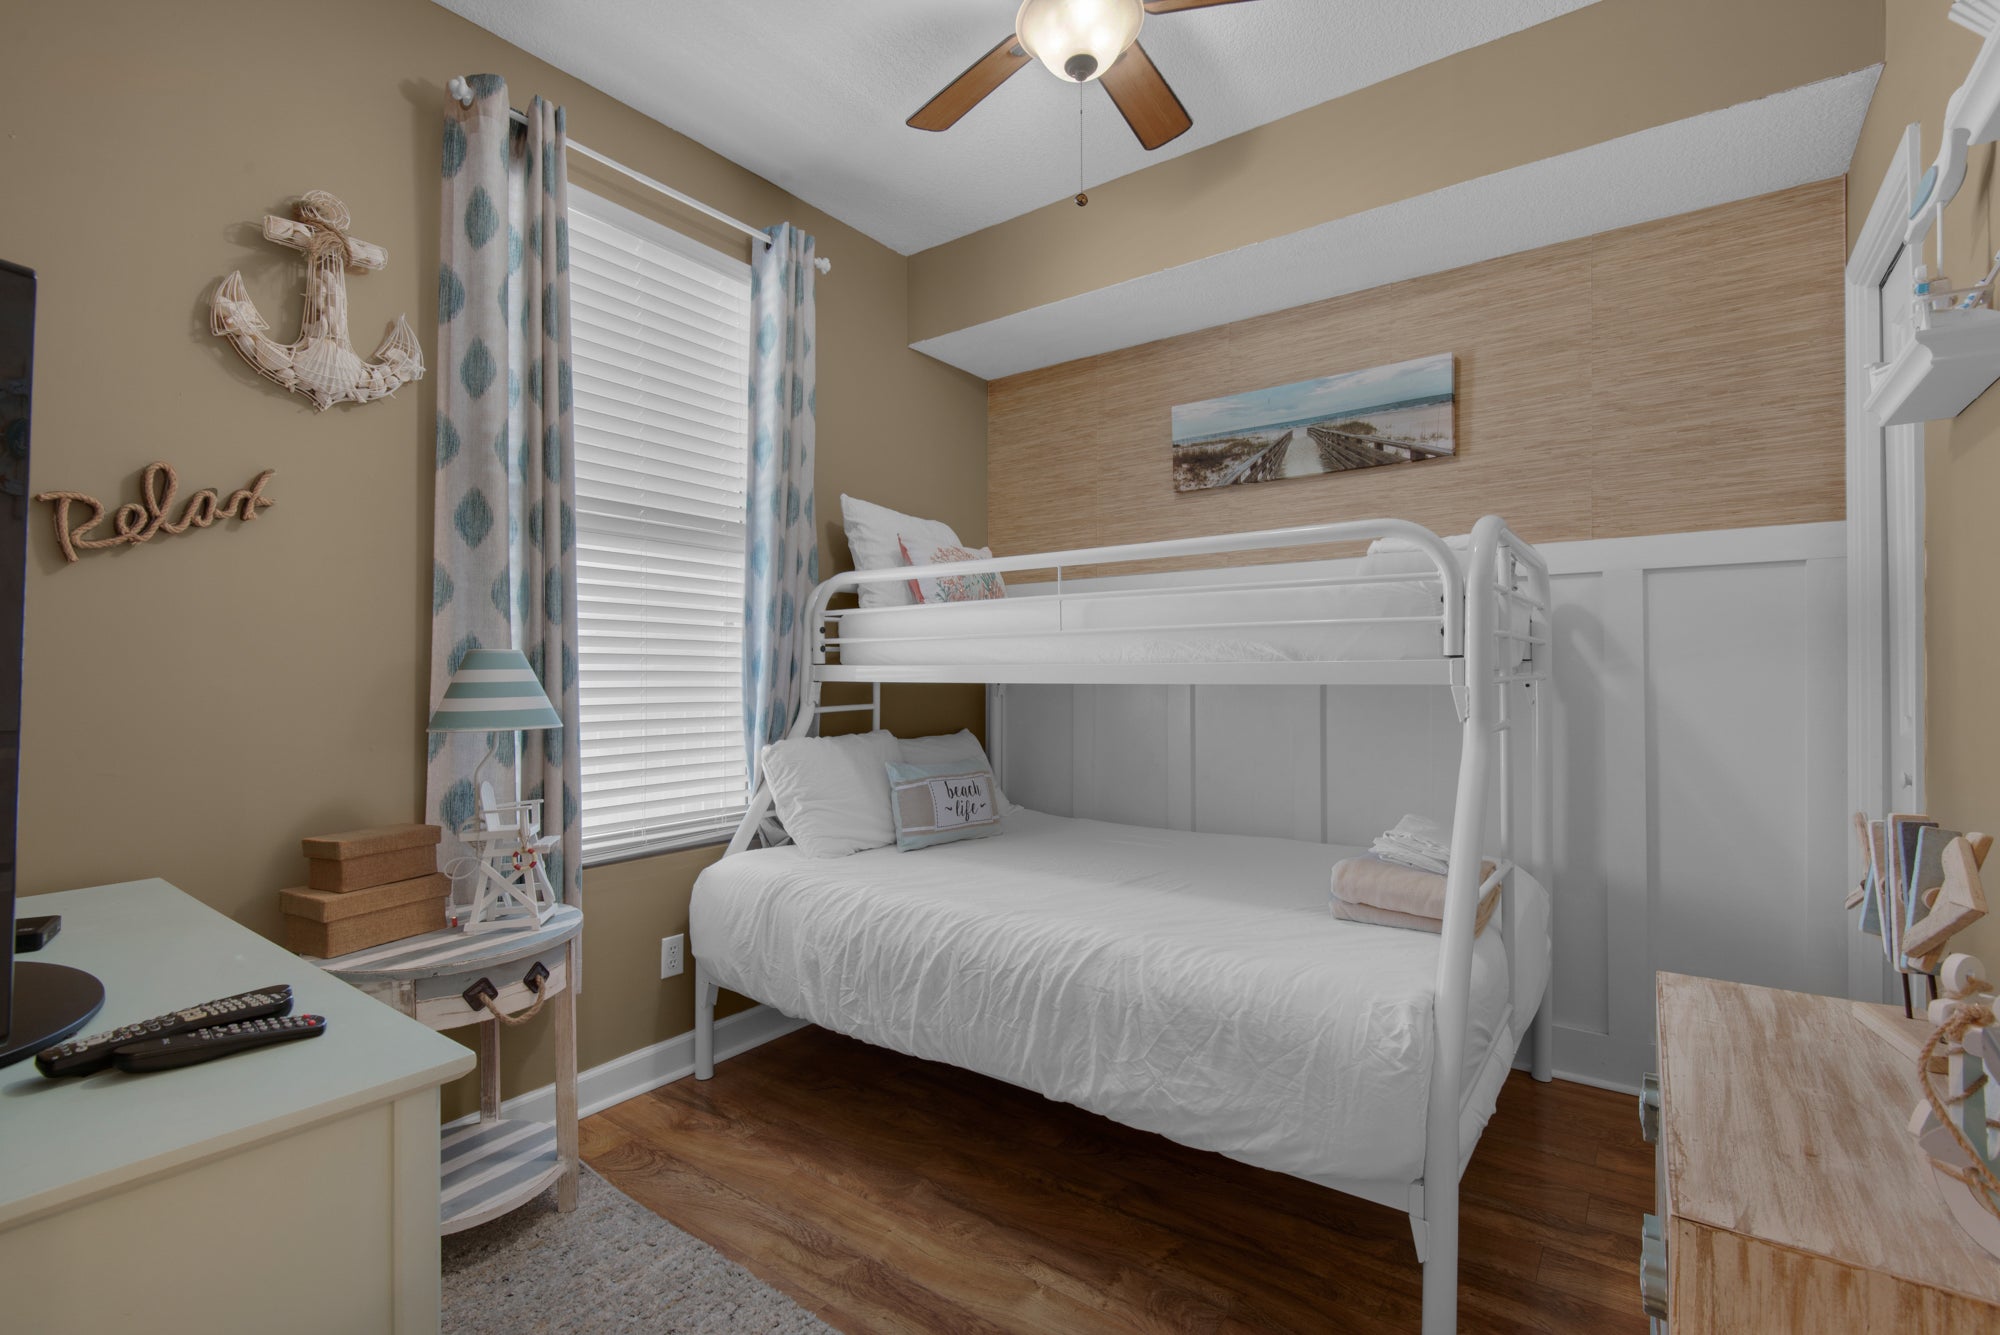 Bunk Beds in the Guest Room